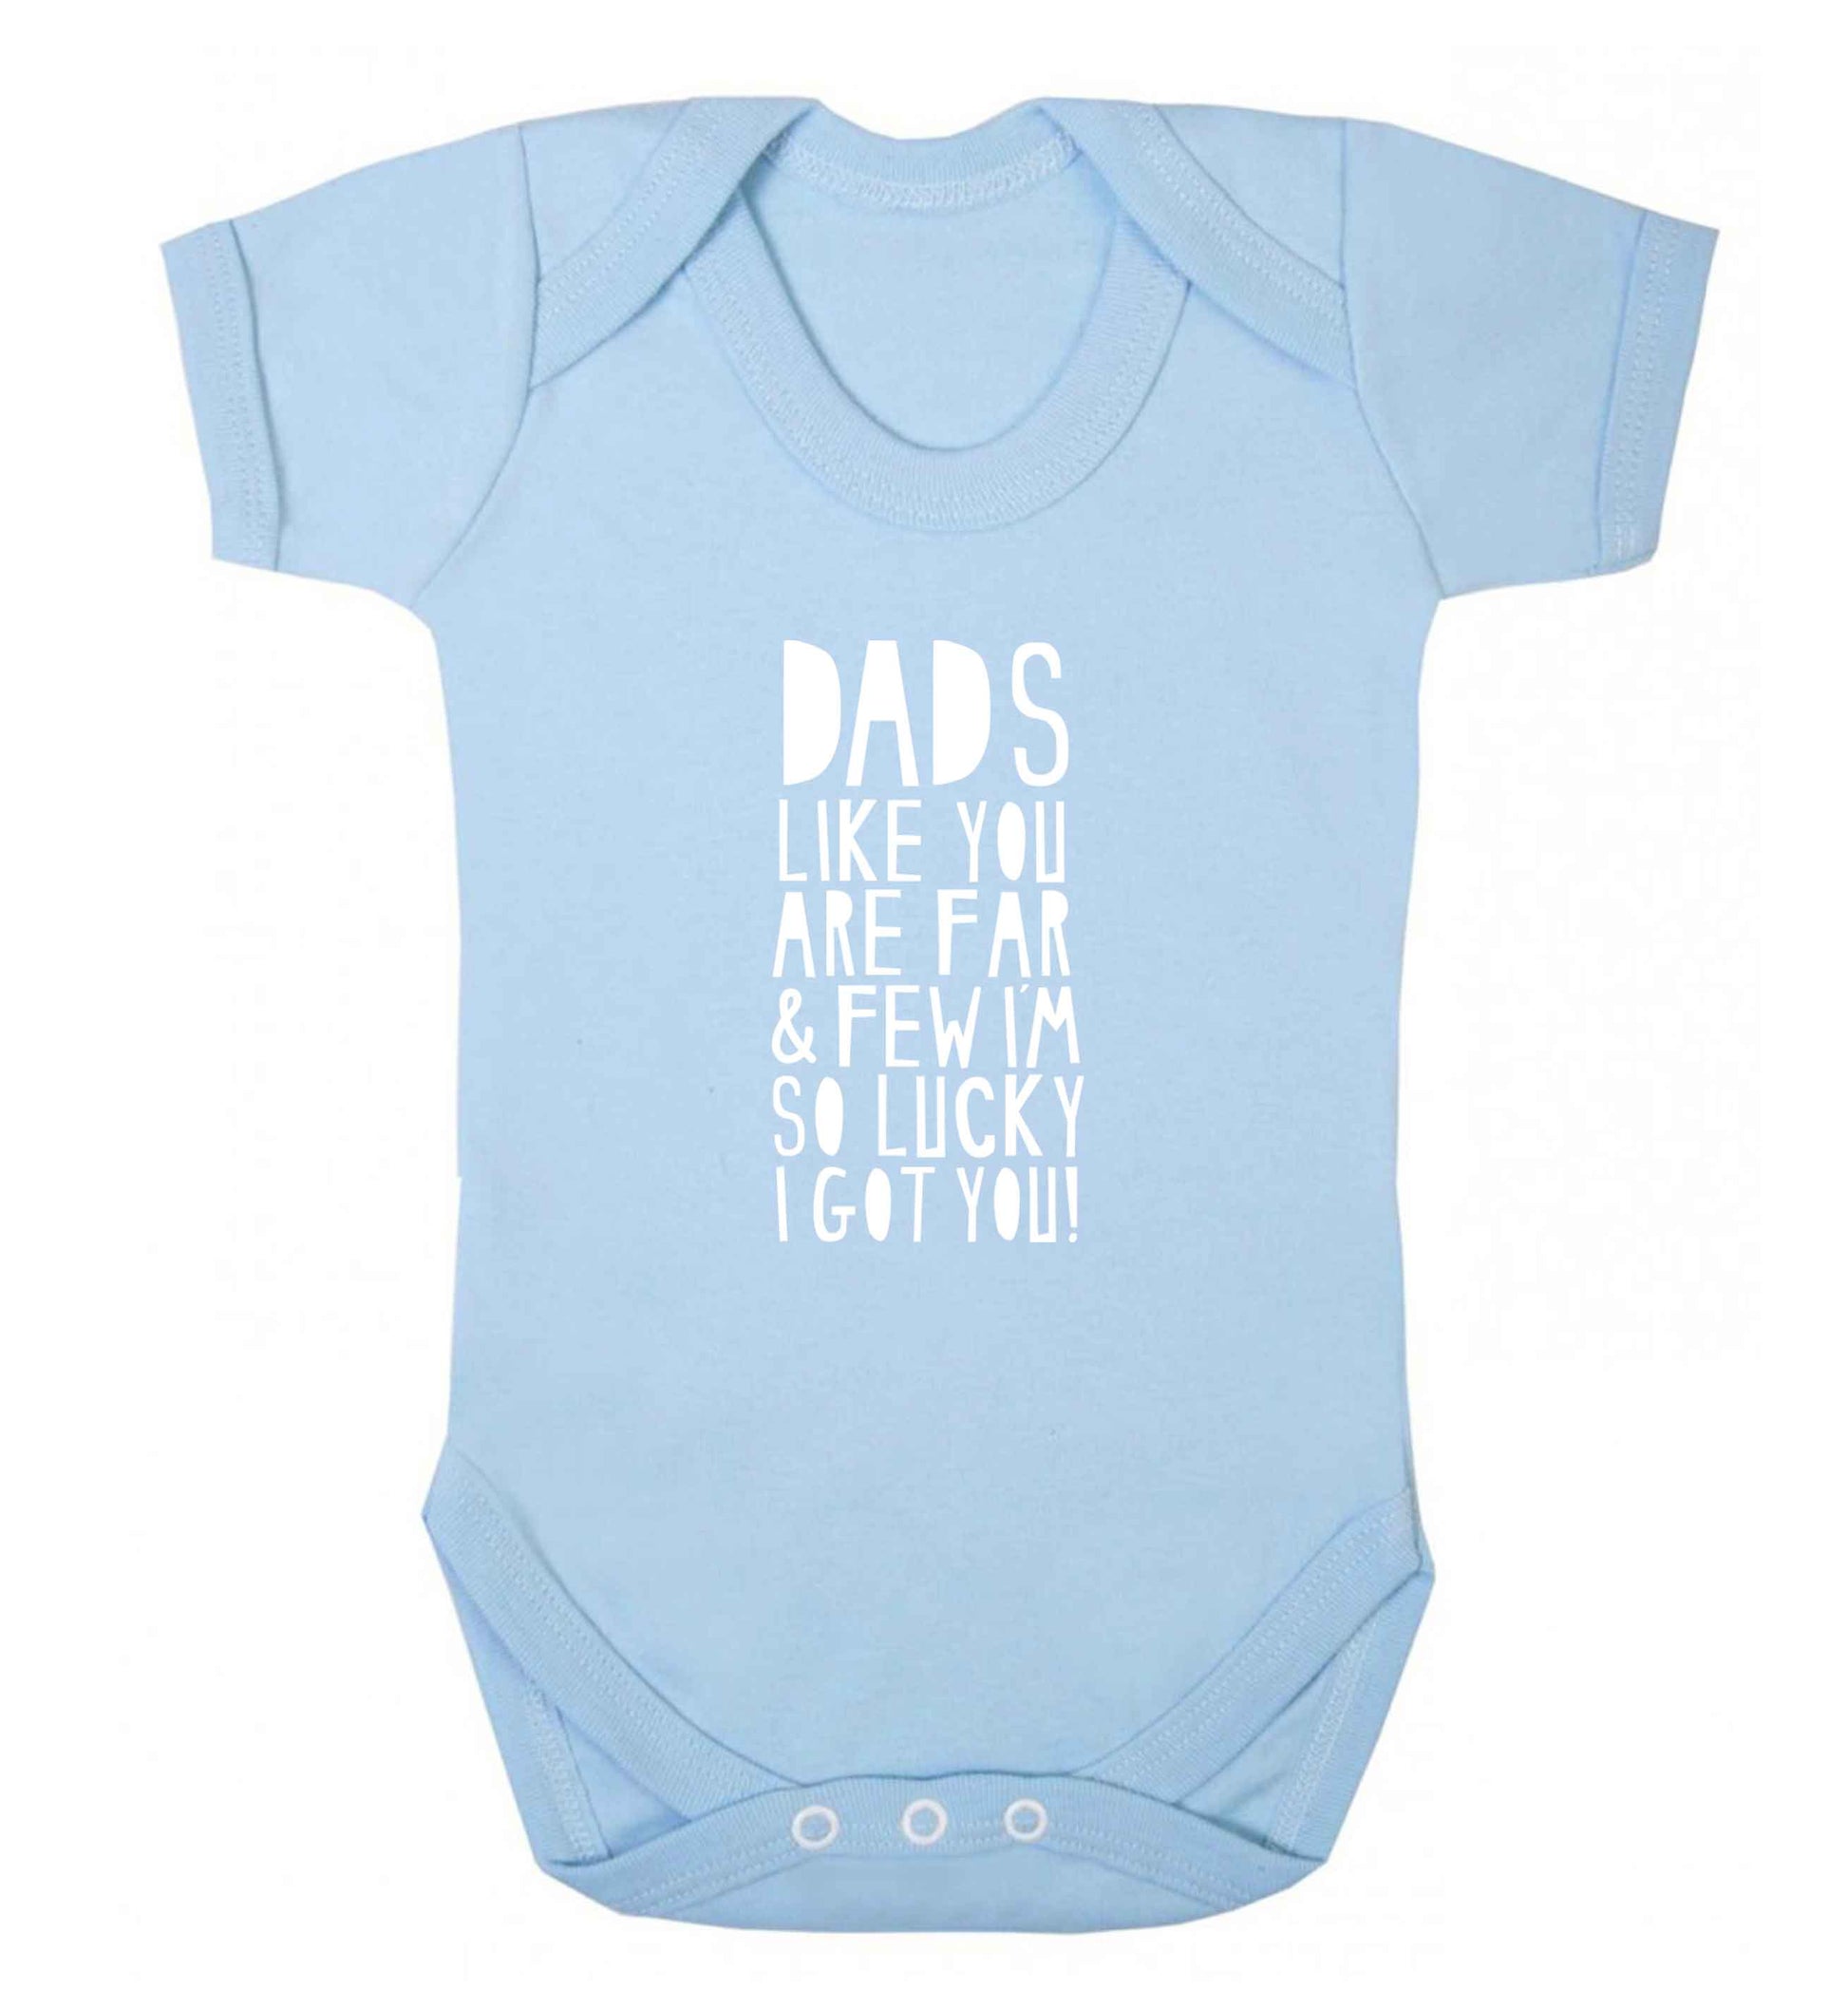 Dads like you are far and few I'm so luck I got you! baby vest pale blue 18-24 months